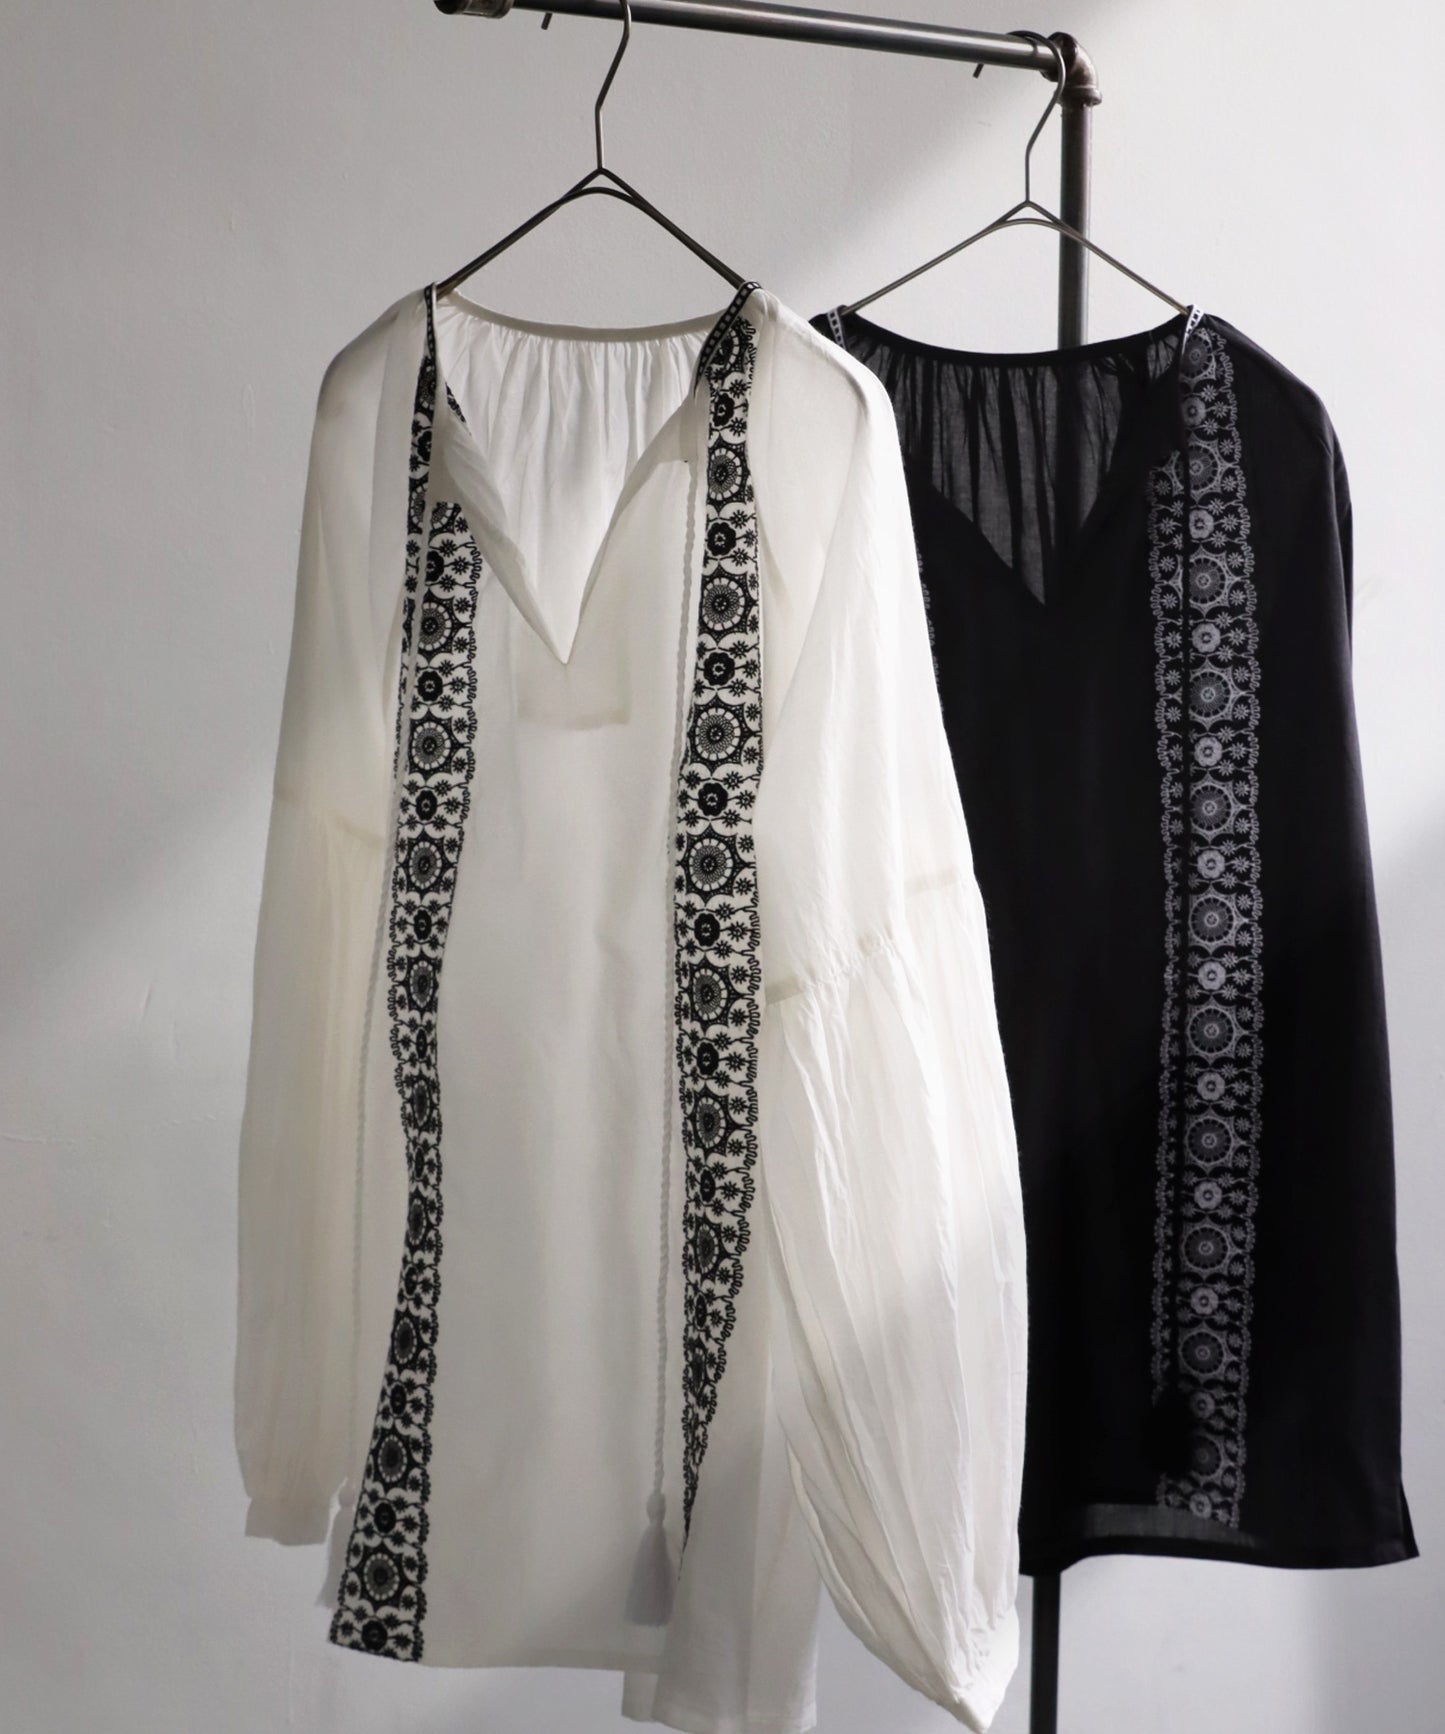 Indian Cotton Embroidery Blouse Ladies Tops Cotton 100